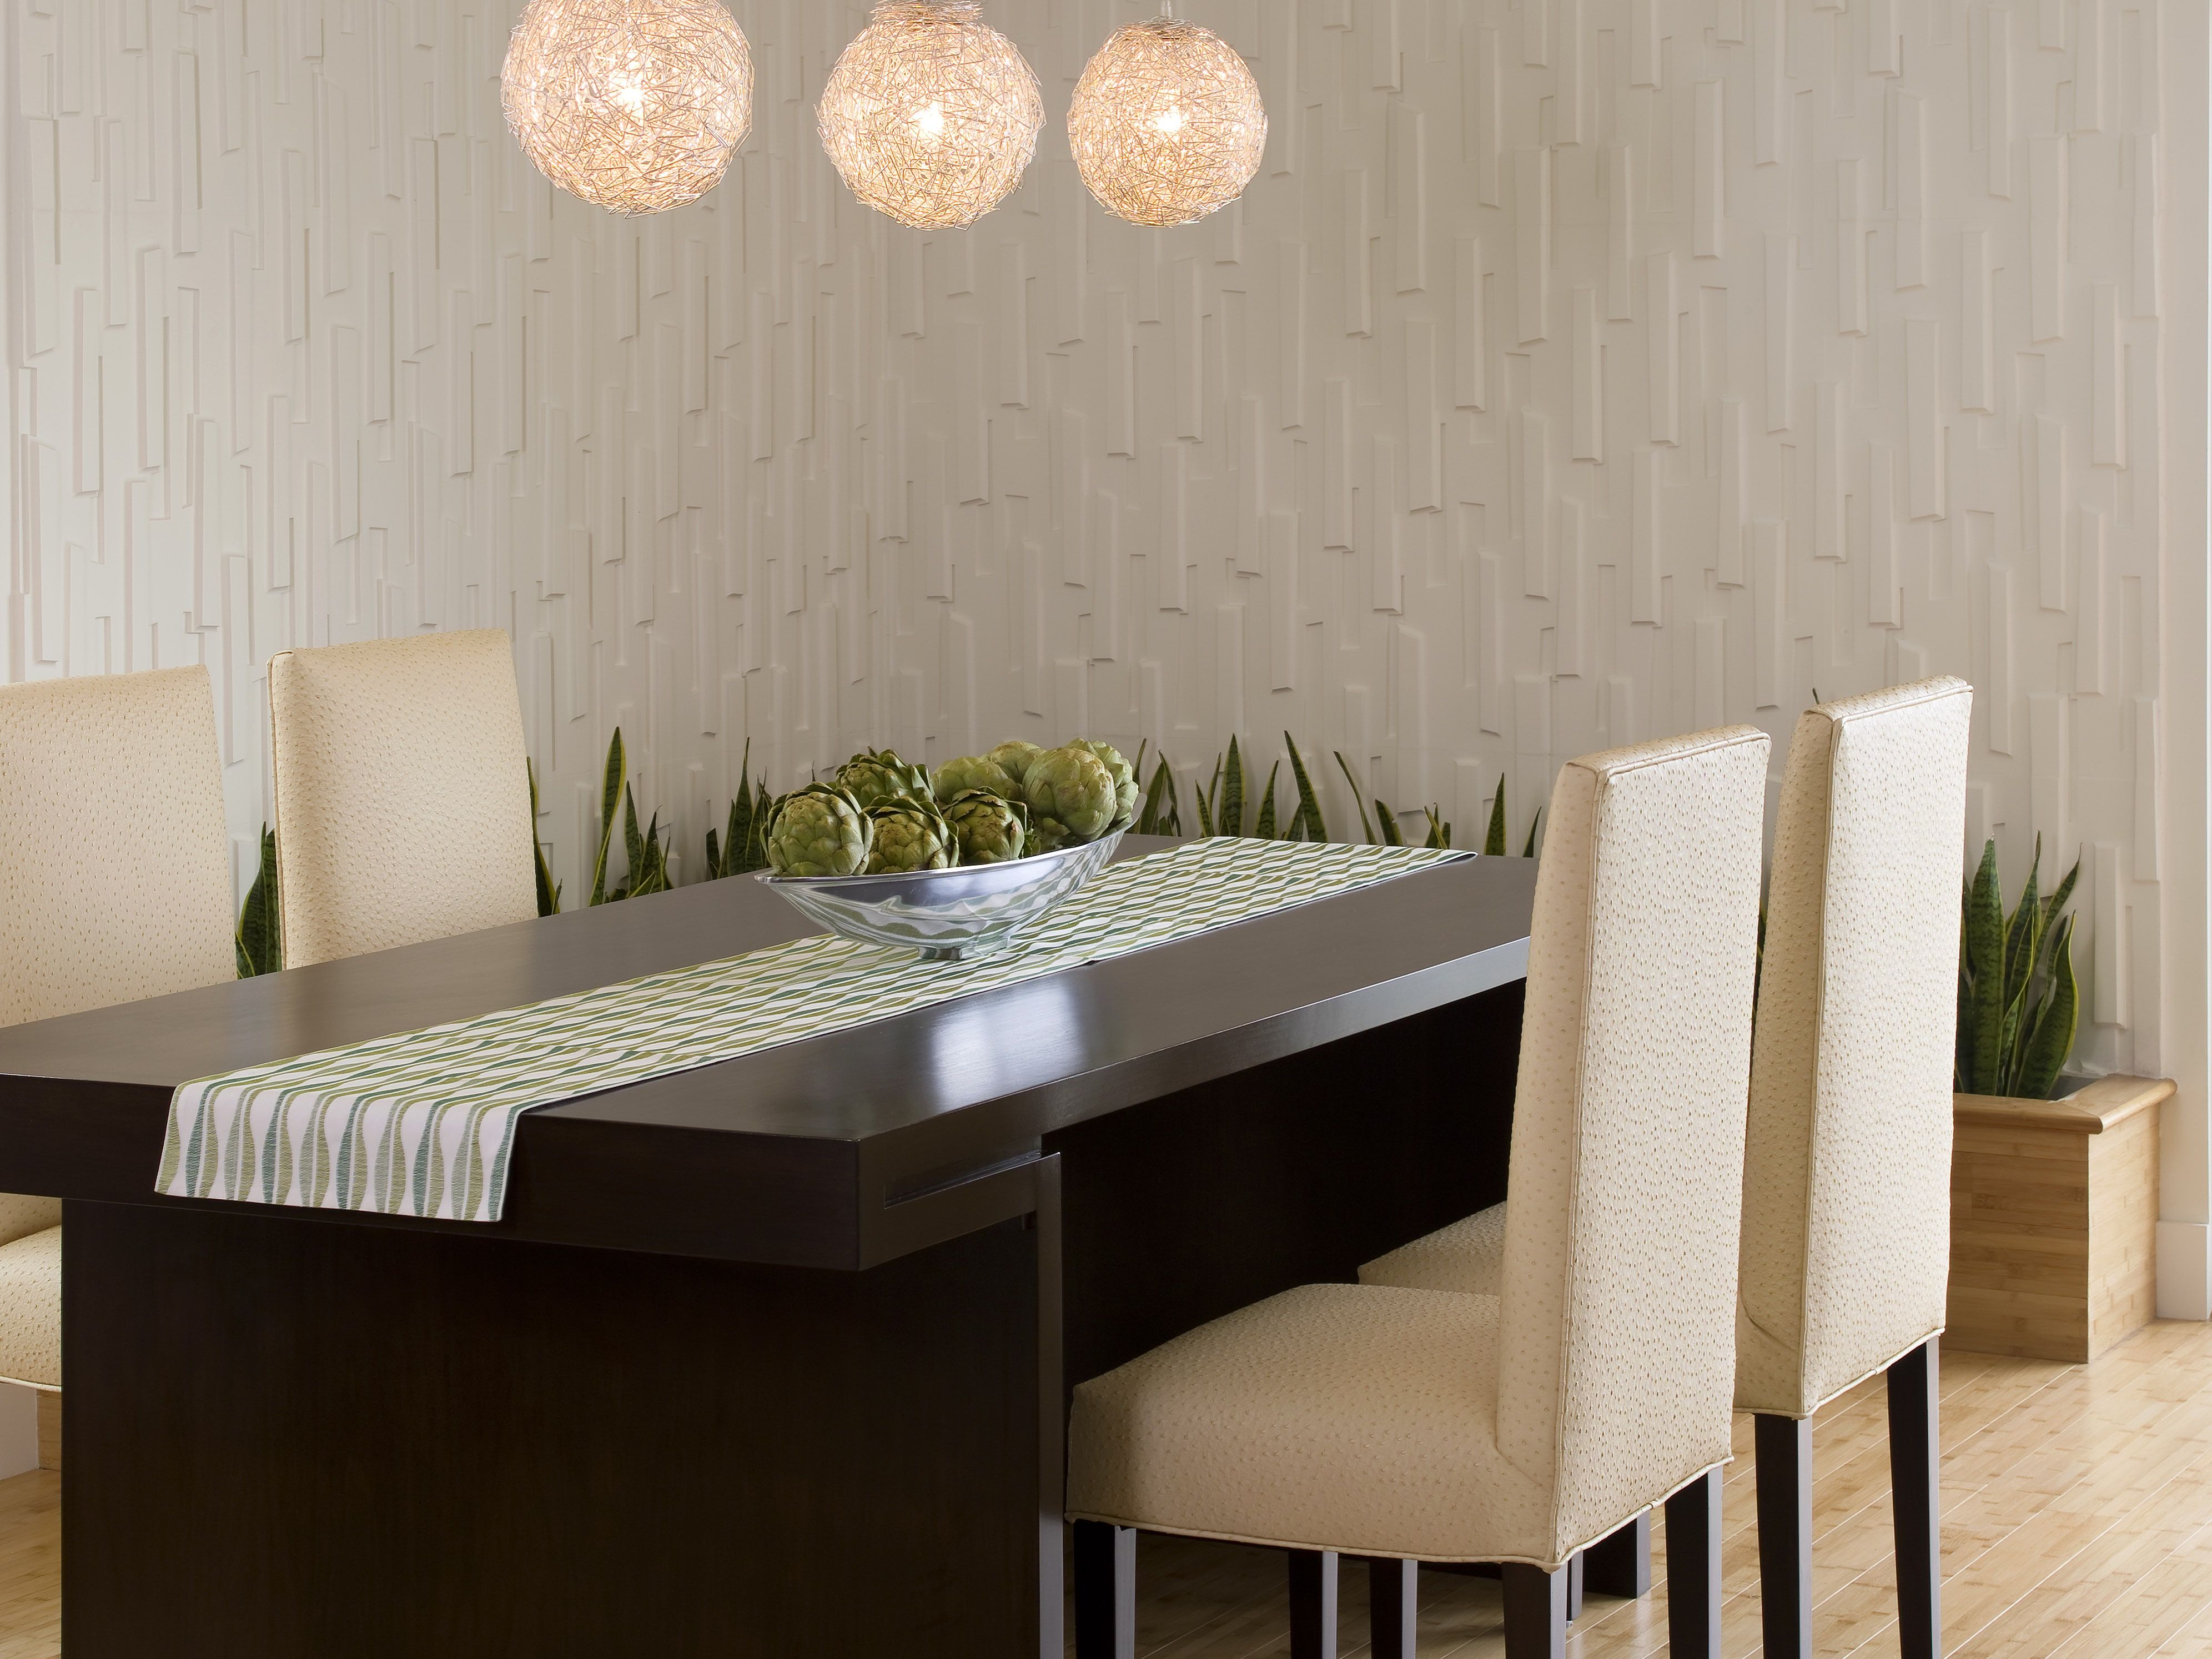 Contemporary Dining Room Decor In Formal Nuance (View 6 of 32)